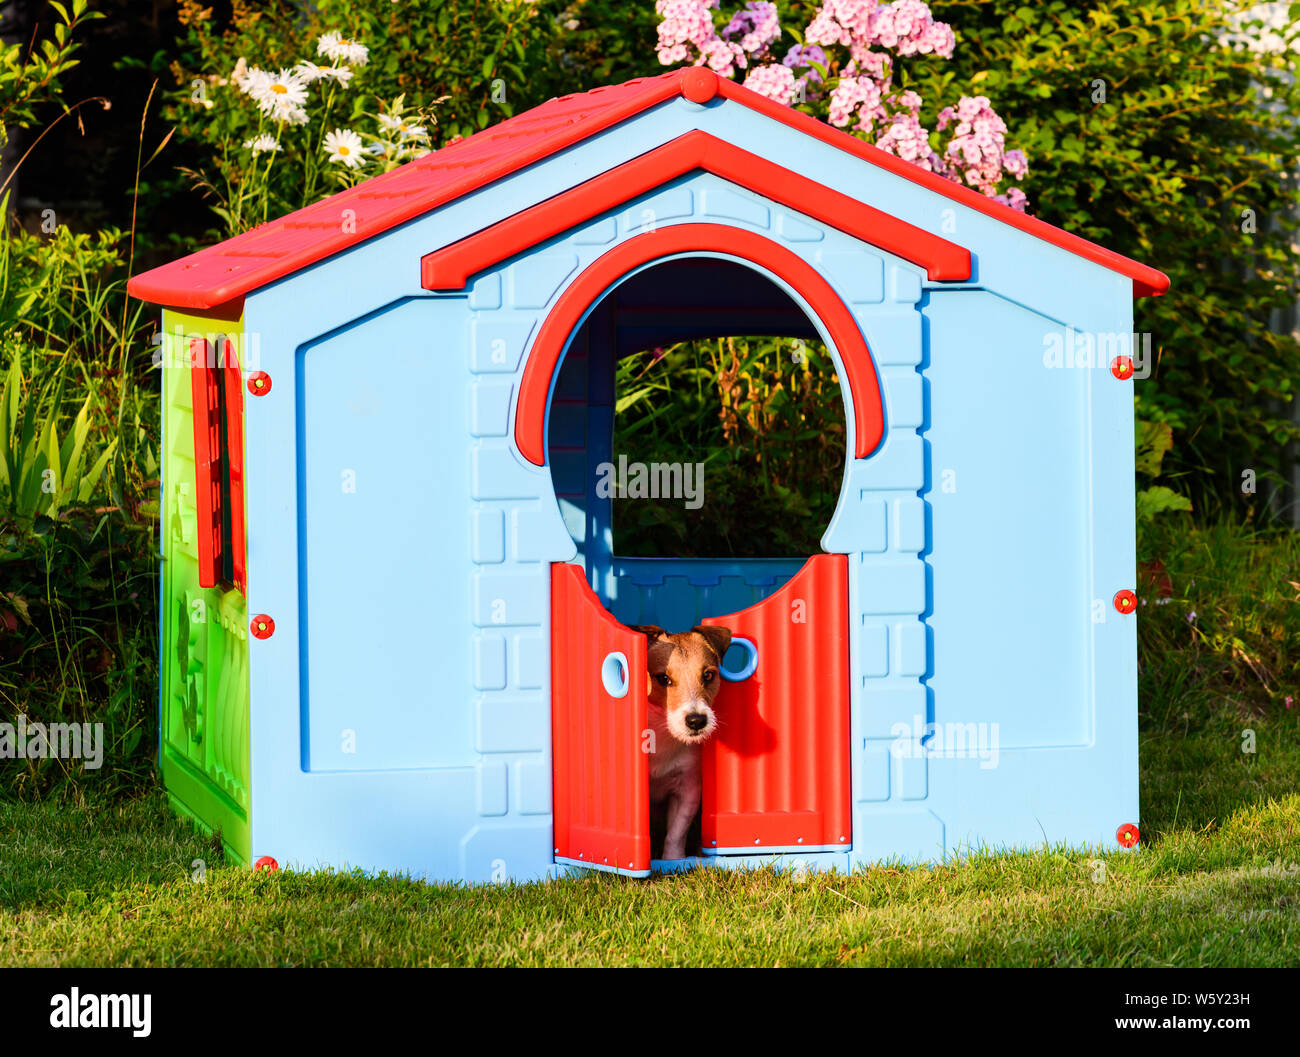 Dog hiding from hot weather in big playground house at backyard Stock Photo